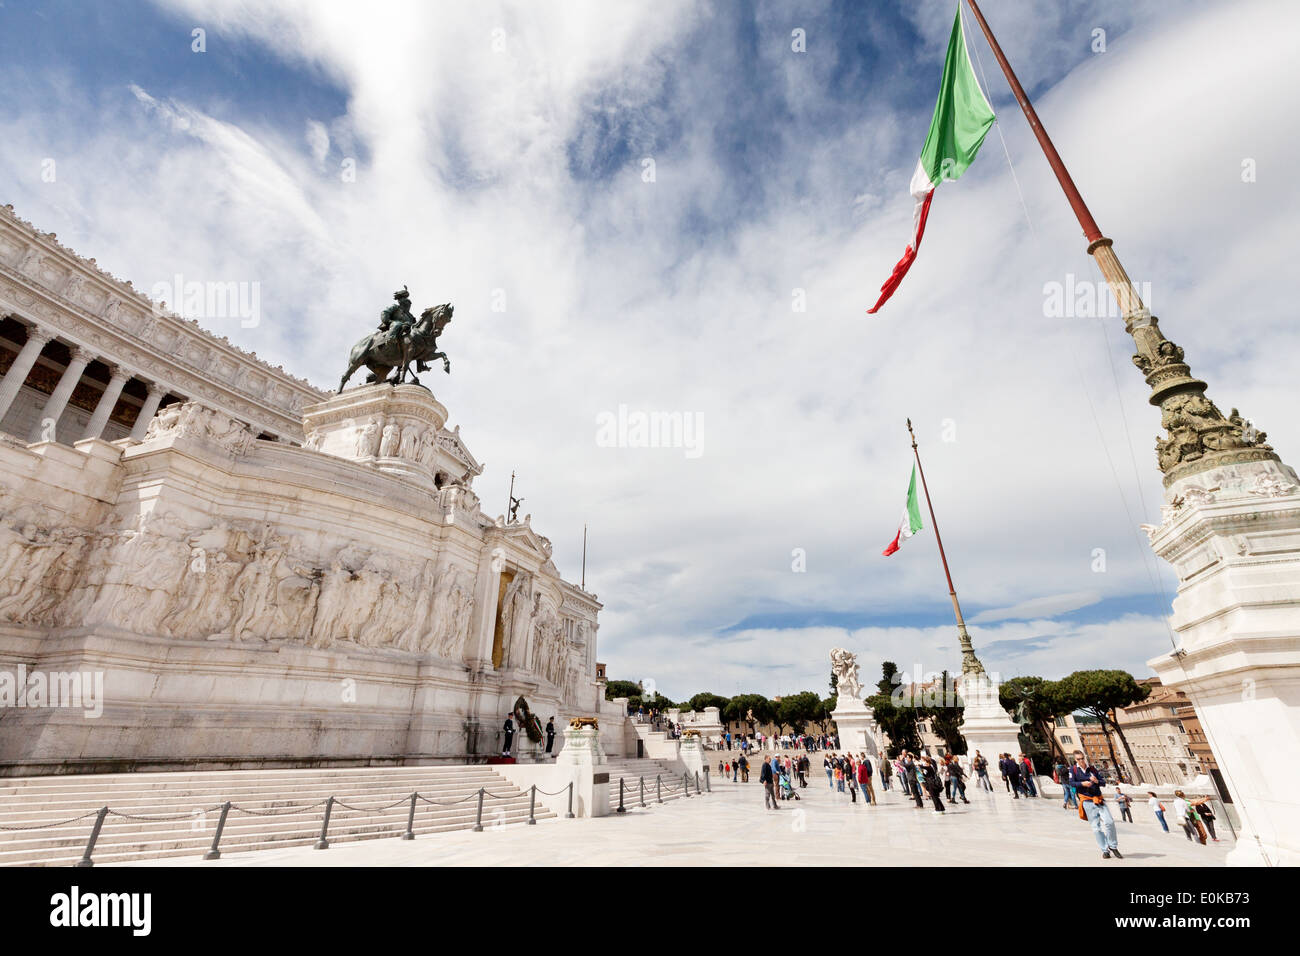 People at the Vittorio Emanuele Building, Rome, Italy Europe Stock Photo